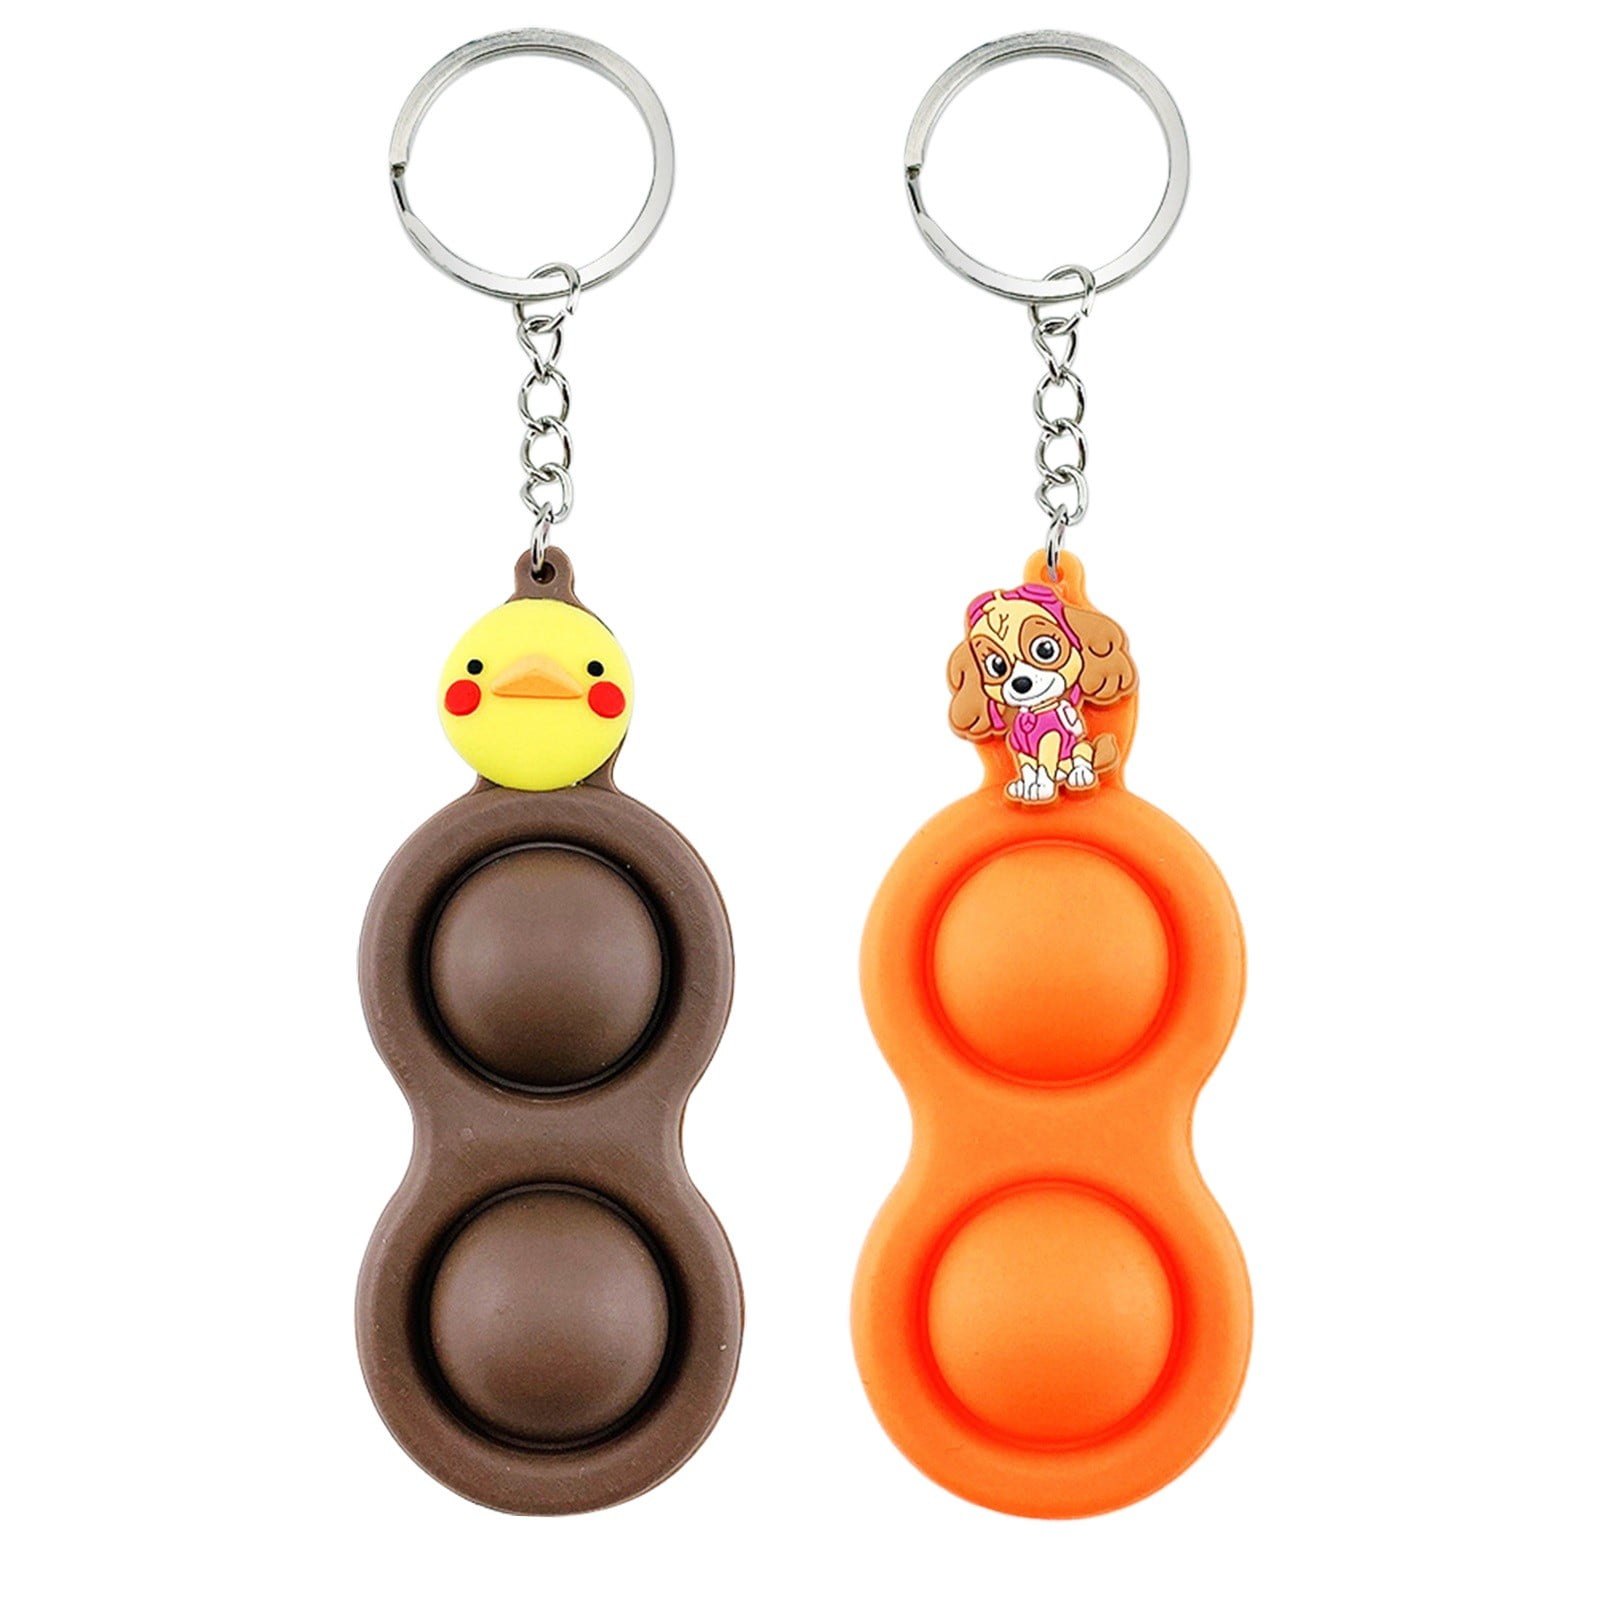 Mini Push Pop Bubble Sensory Fidget Toy with Buckle Ring,Stress Reliever Silicone Keychain Toy for Kid and Adult Anxiety Autism Octopus-BlackbBlue Simple Dimple Toy 